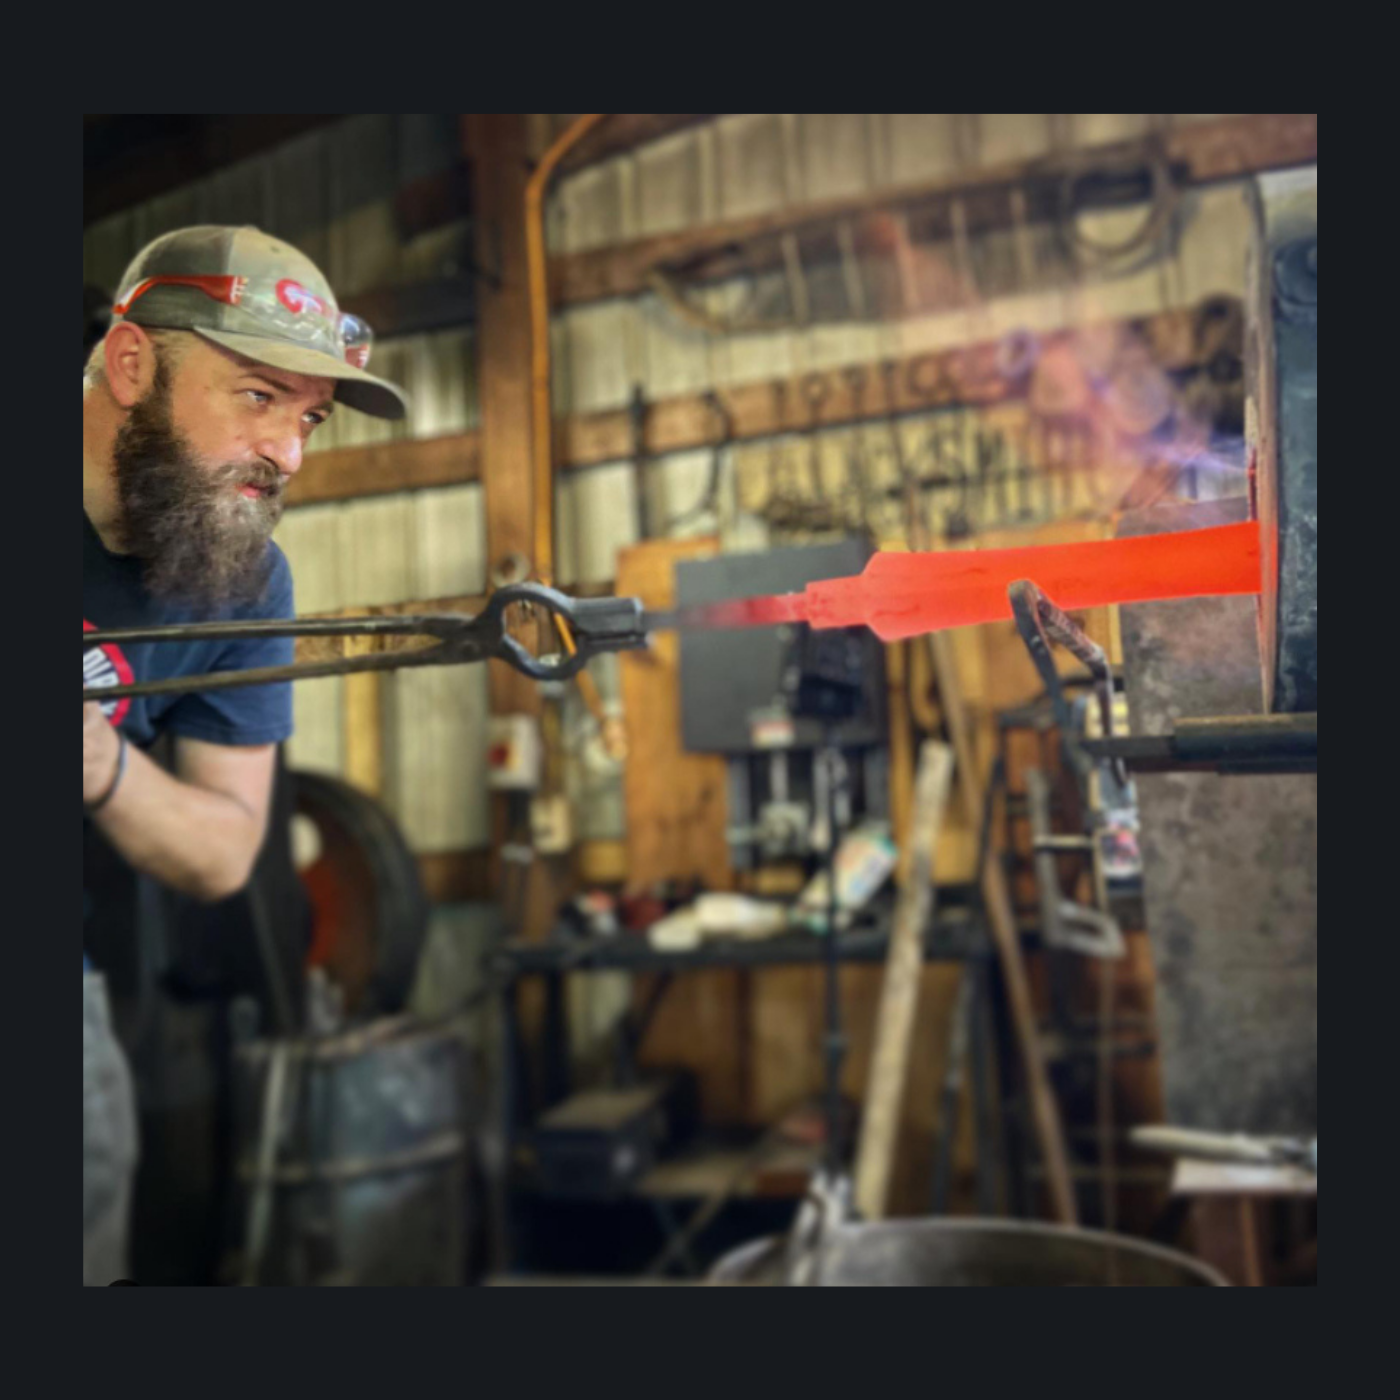 Blacksmithing: An Artform, A Culture, and a Piece of the Past